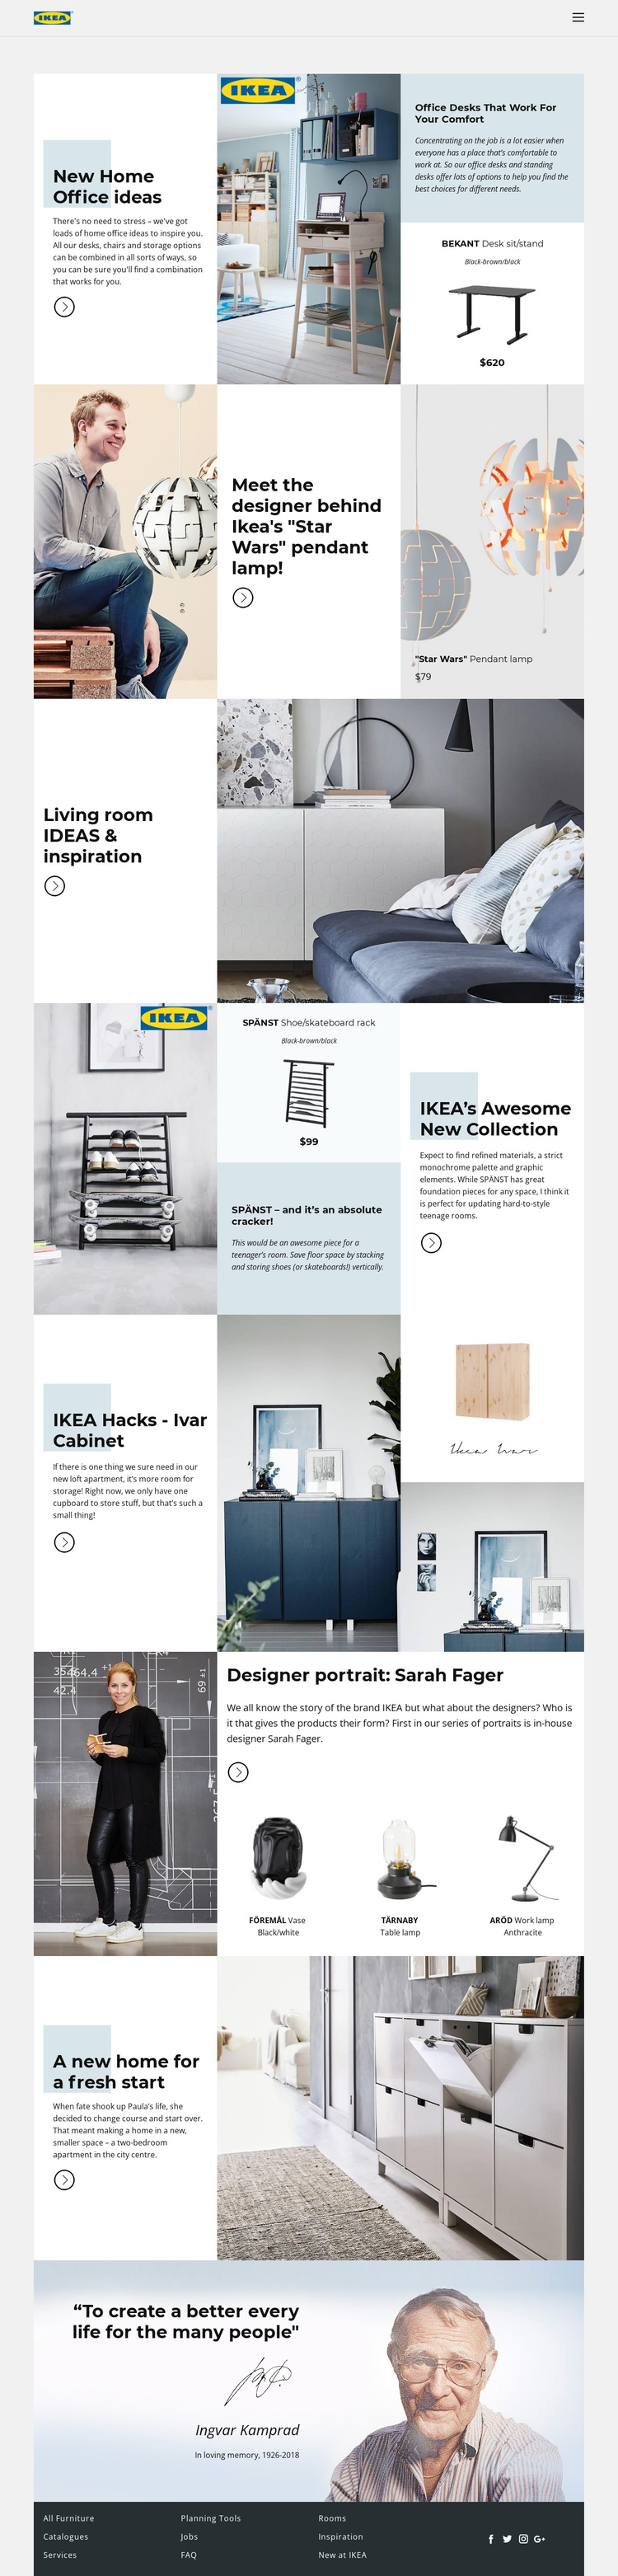 Inspiration from IKEA One Page Template